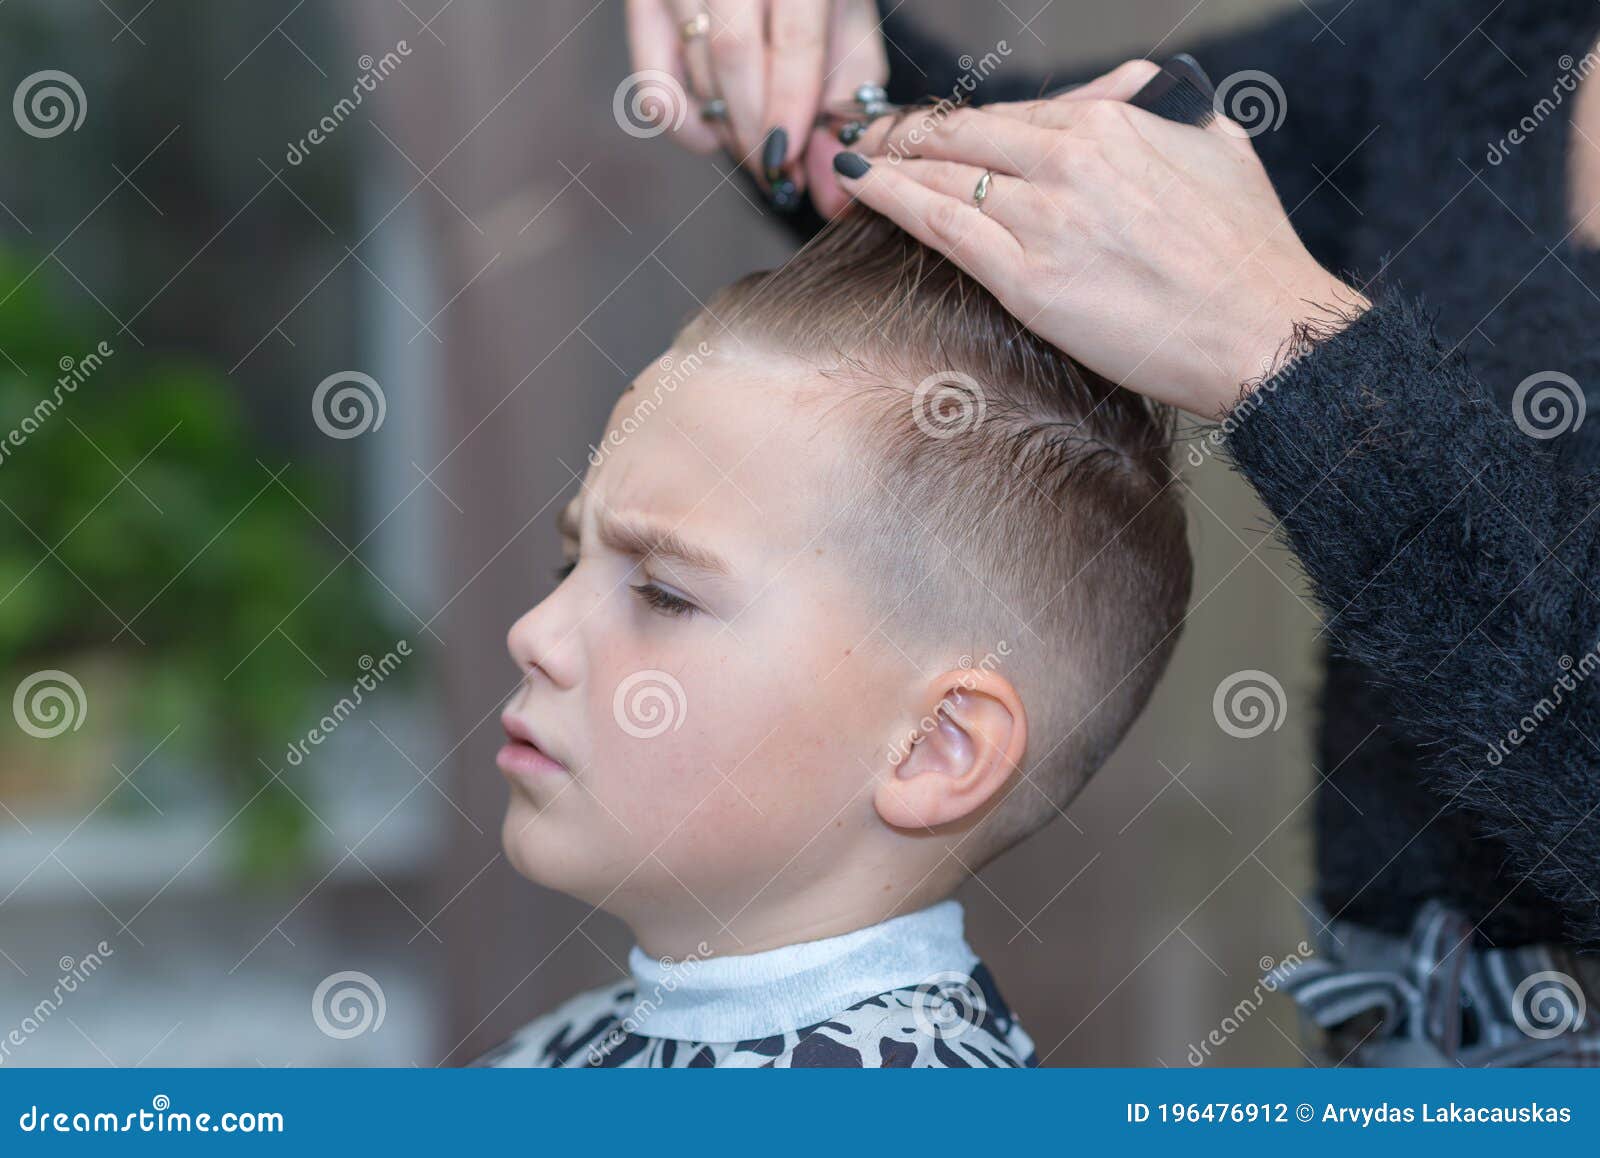 Side View Hairdresser Makes a Stylish Hairstyle. the Woman is Standing and  Making Haircut for Blonde Boy Stock Photo - Image of care, client: 196476912